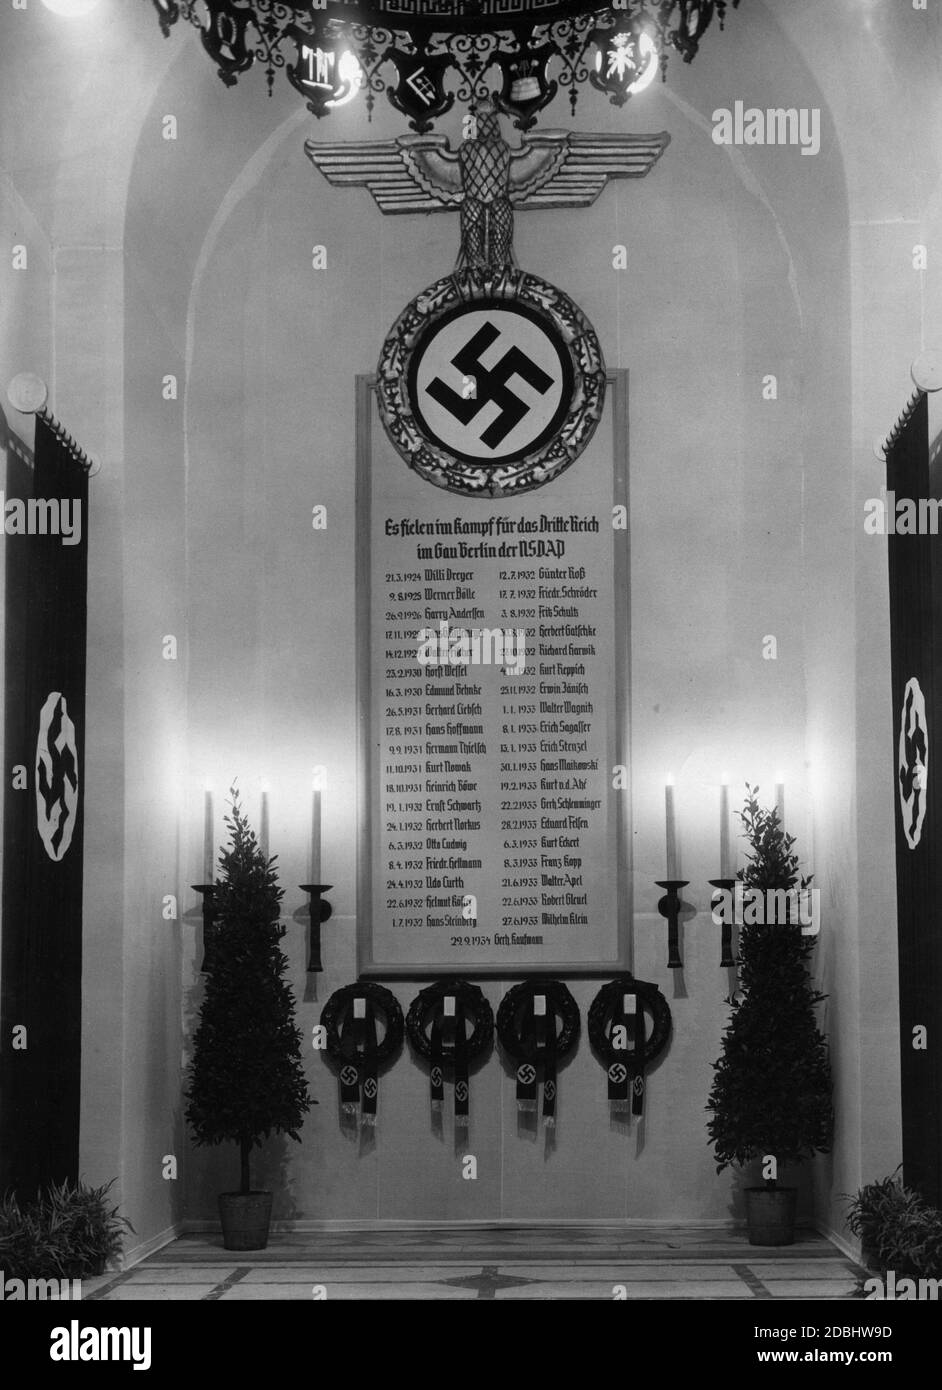 'View into the hall of honour of the exhibition ''10 Jahre Kampf um Berlin'' (''10 Years of Struggle for Berlin'') on the occasion of the tenth anniversary of the Gau Berlin of the NSDAP in the City Hall of Berlin.' Stock Photo